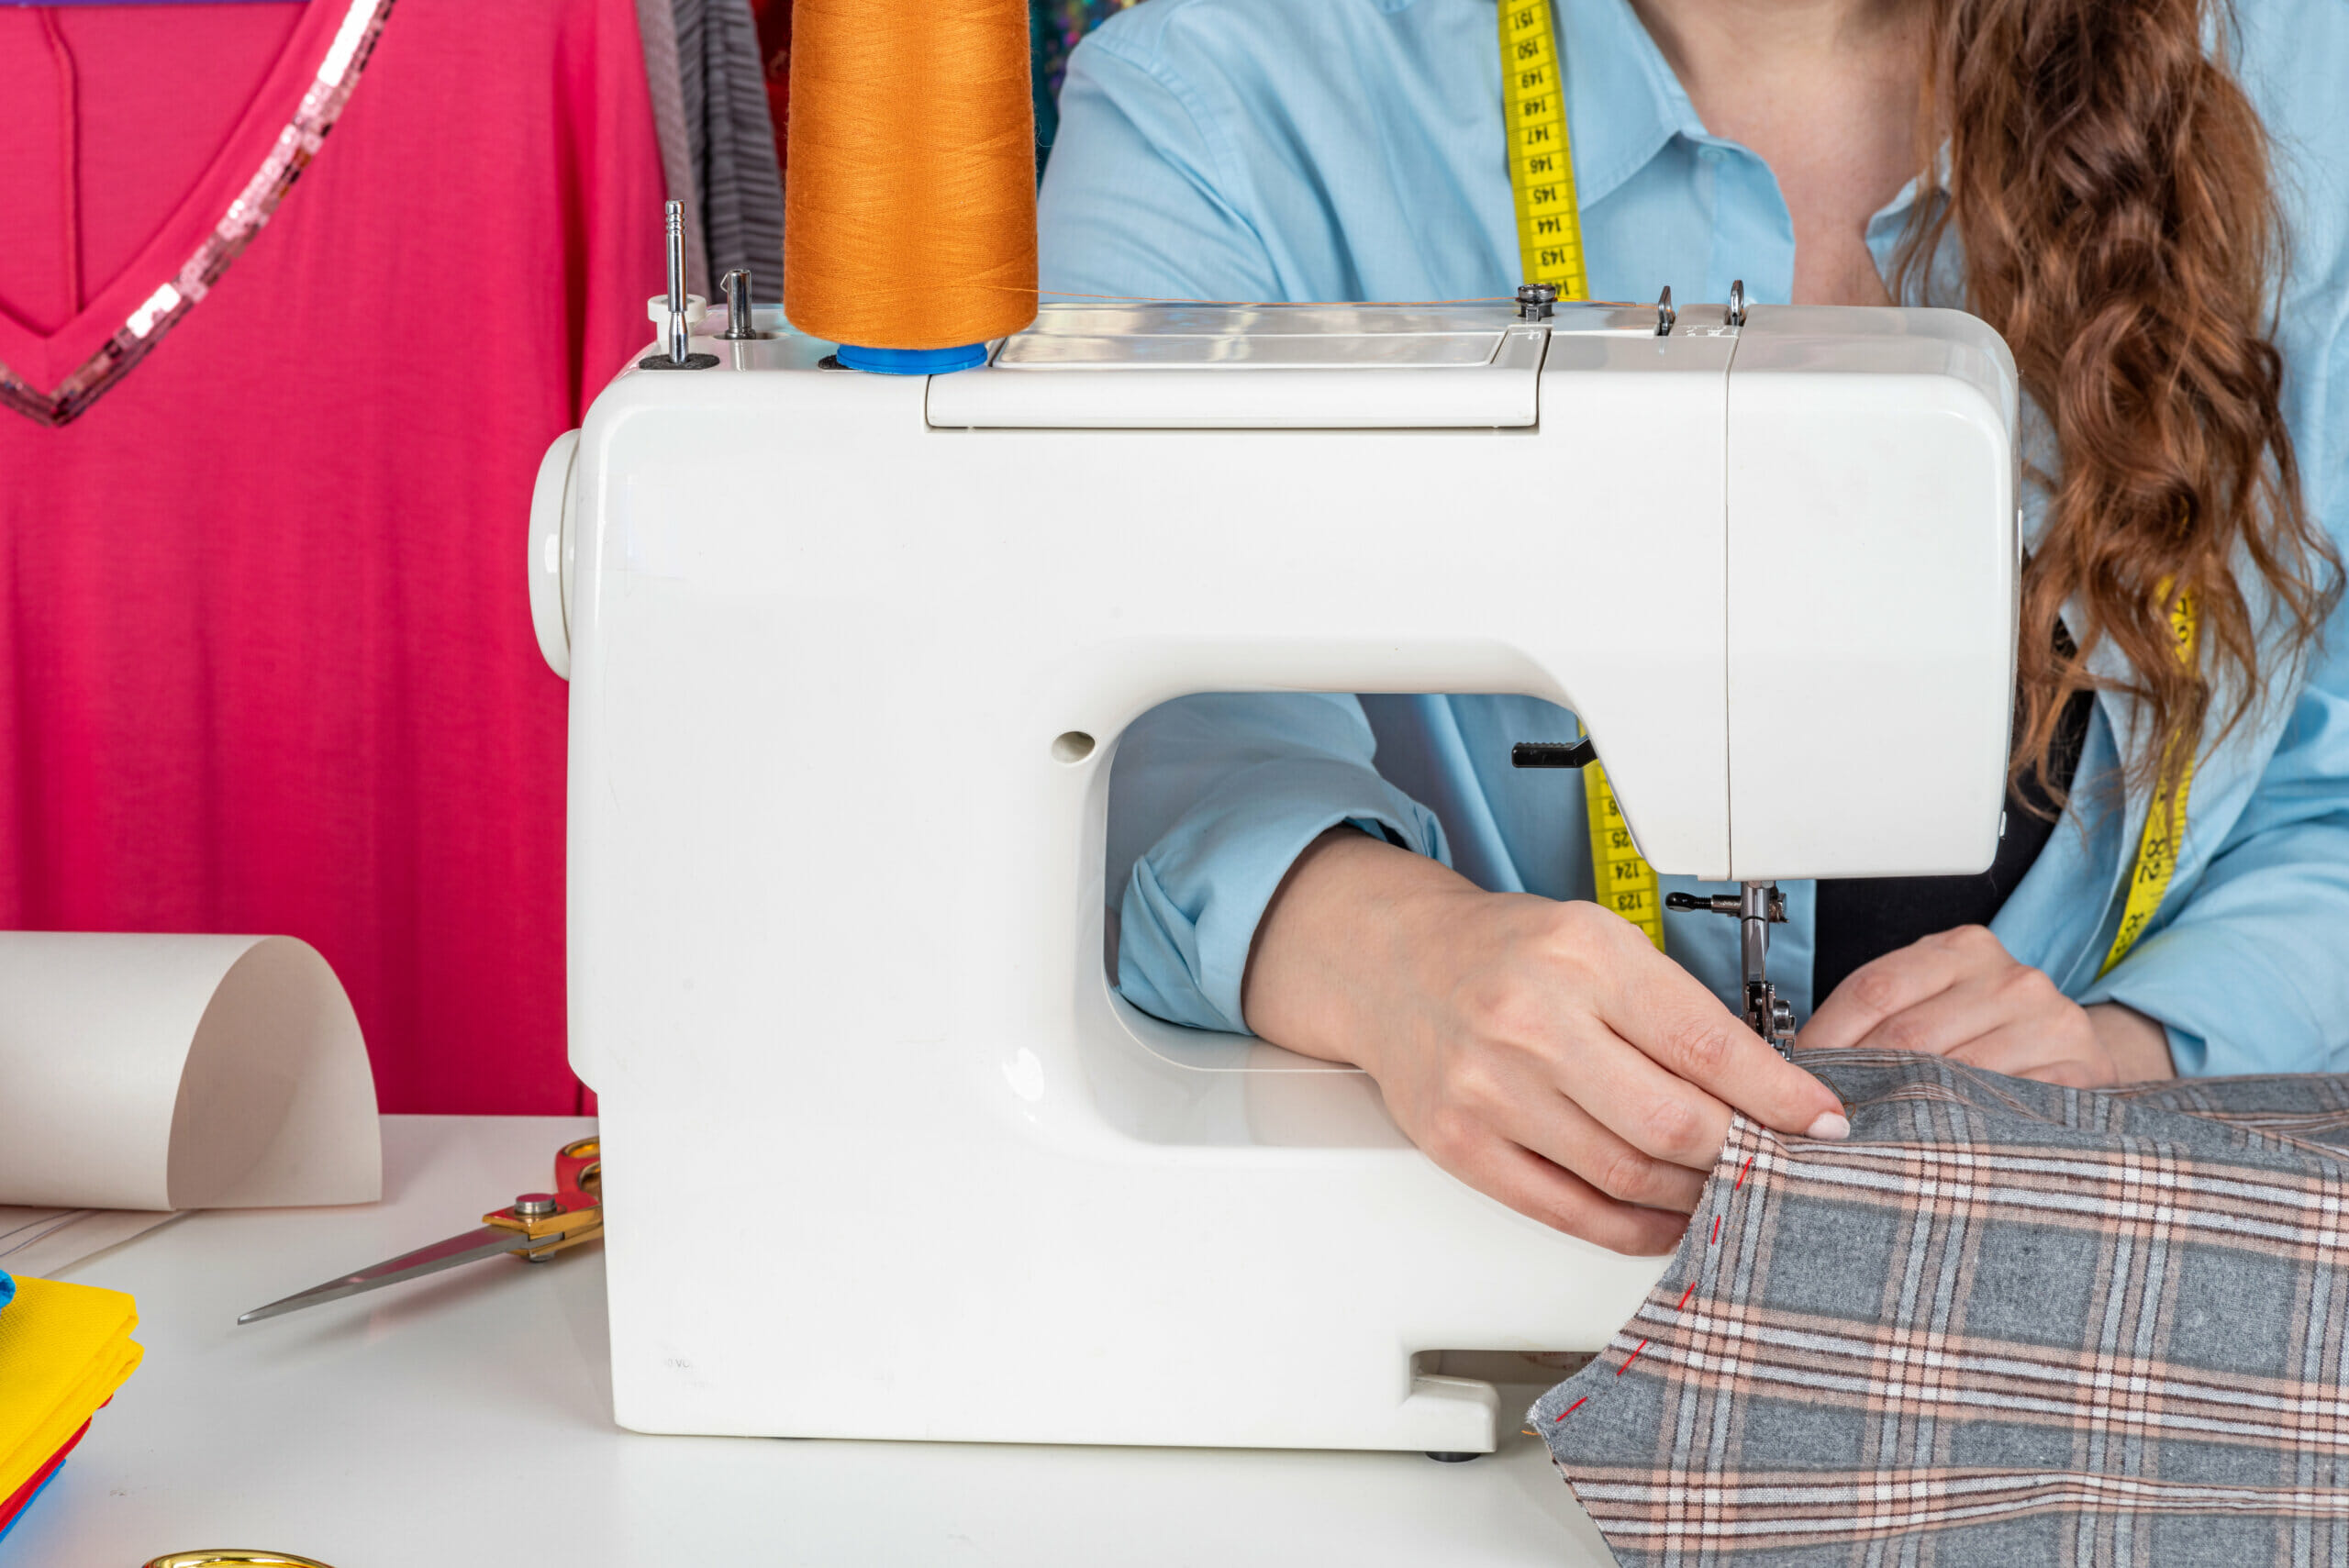 https://static.icansewthis.com/2021/09/sewing-machine-scaled.jpg